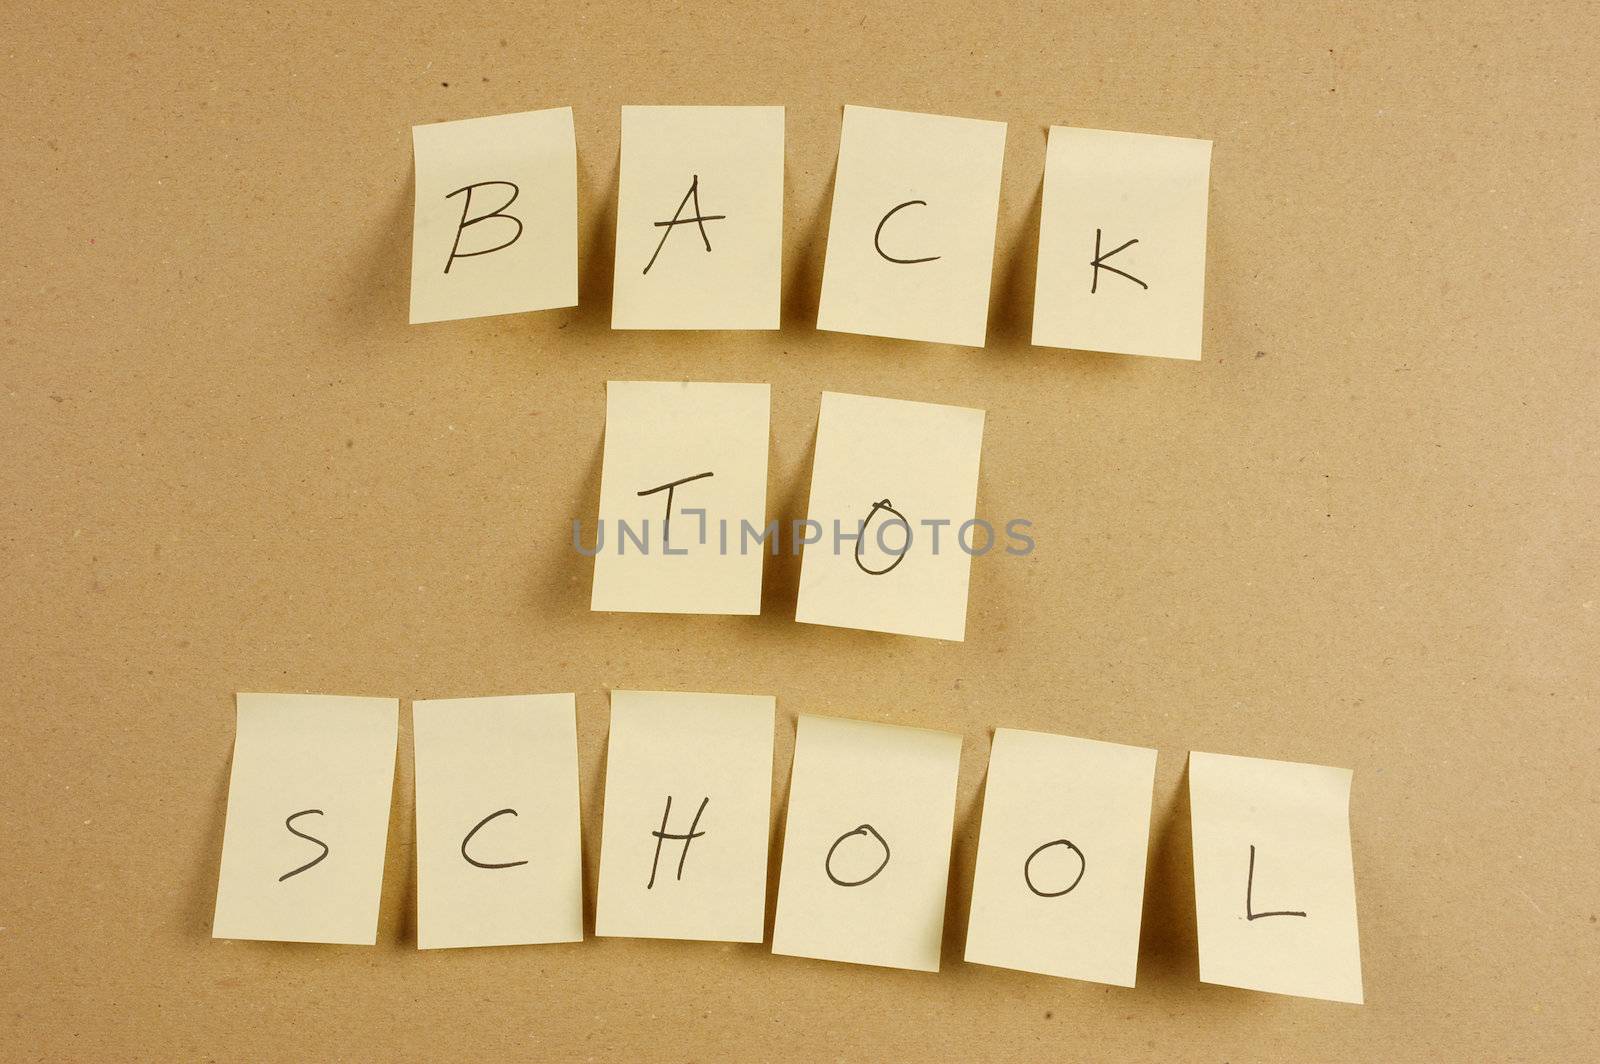 writing back to school is spelled in a sheet of paper affixed to the wall brown carton